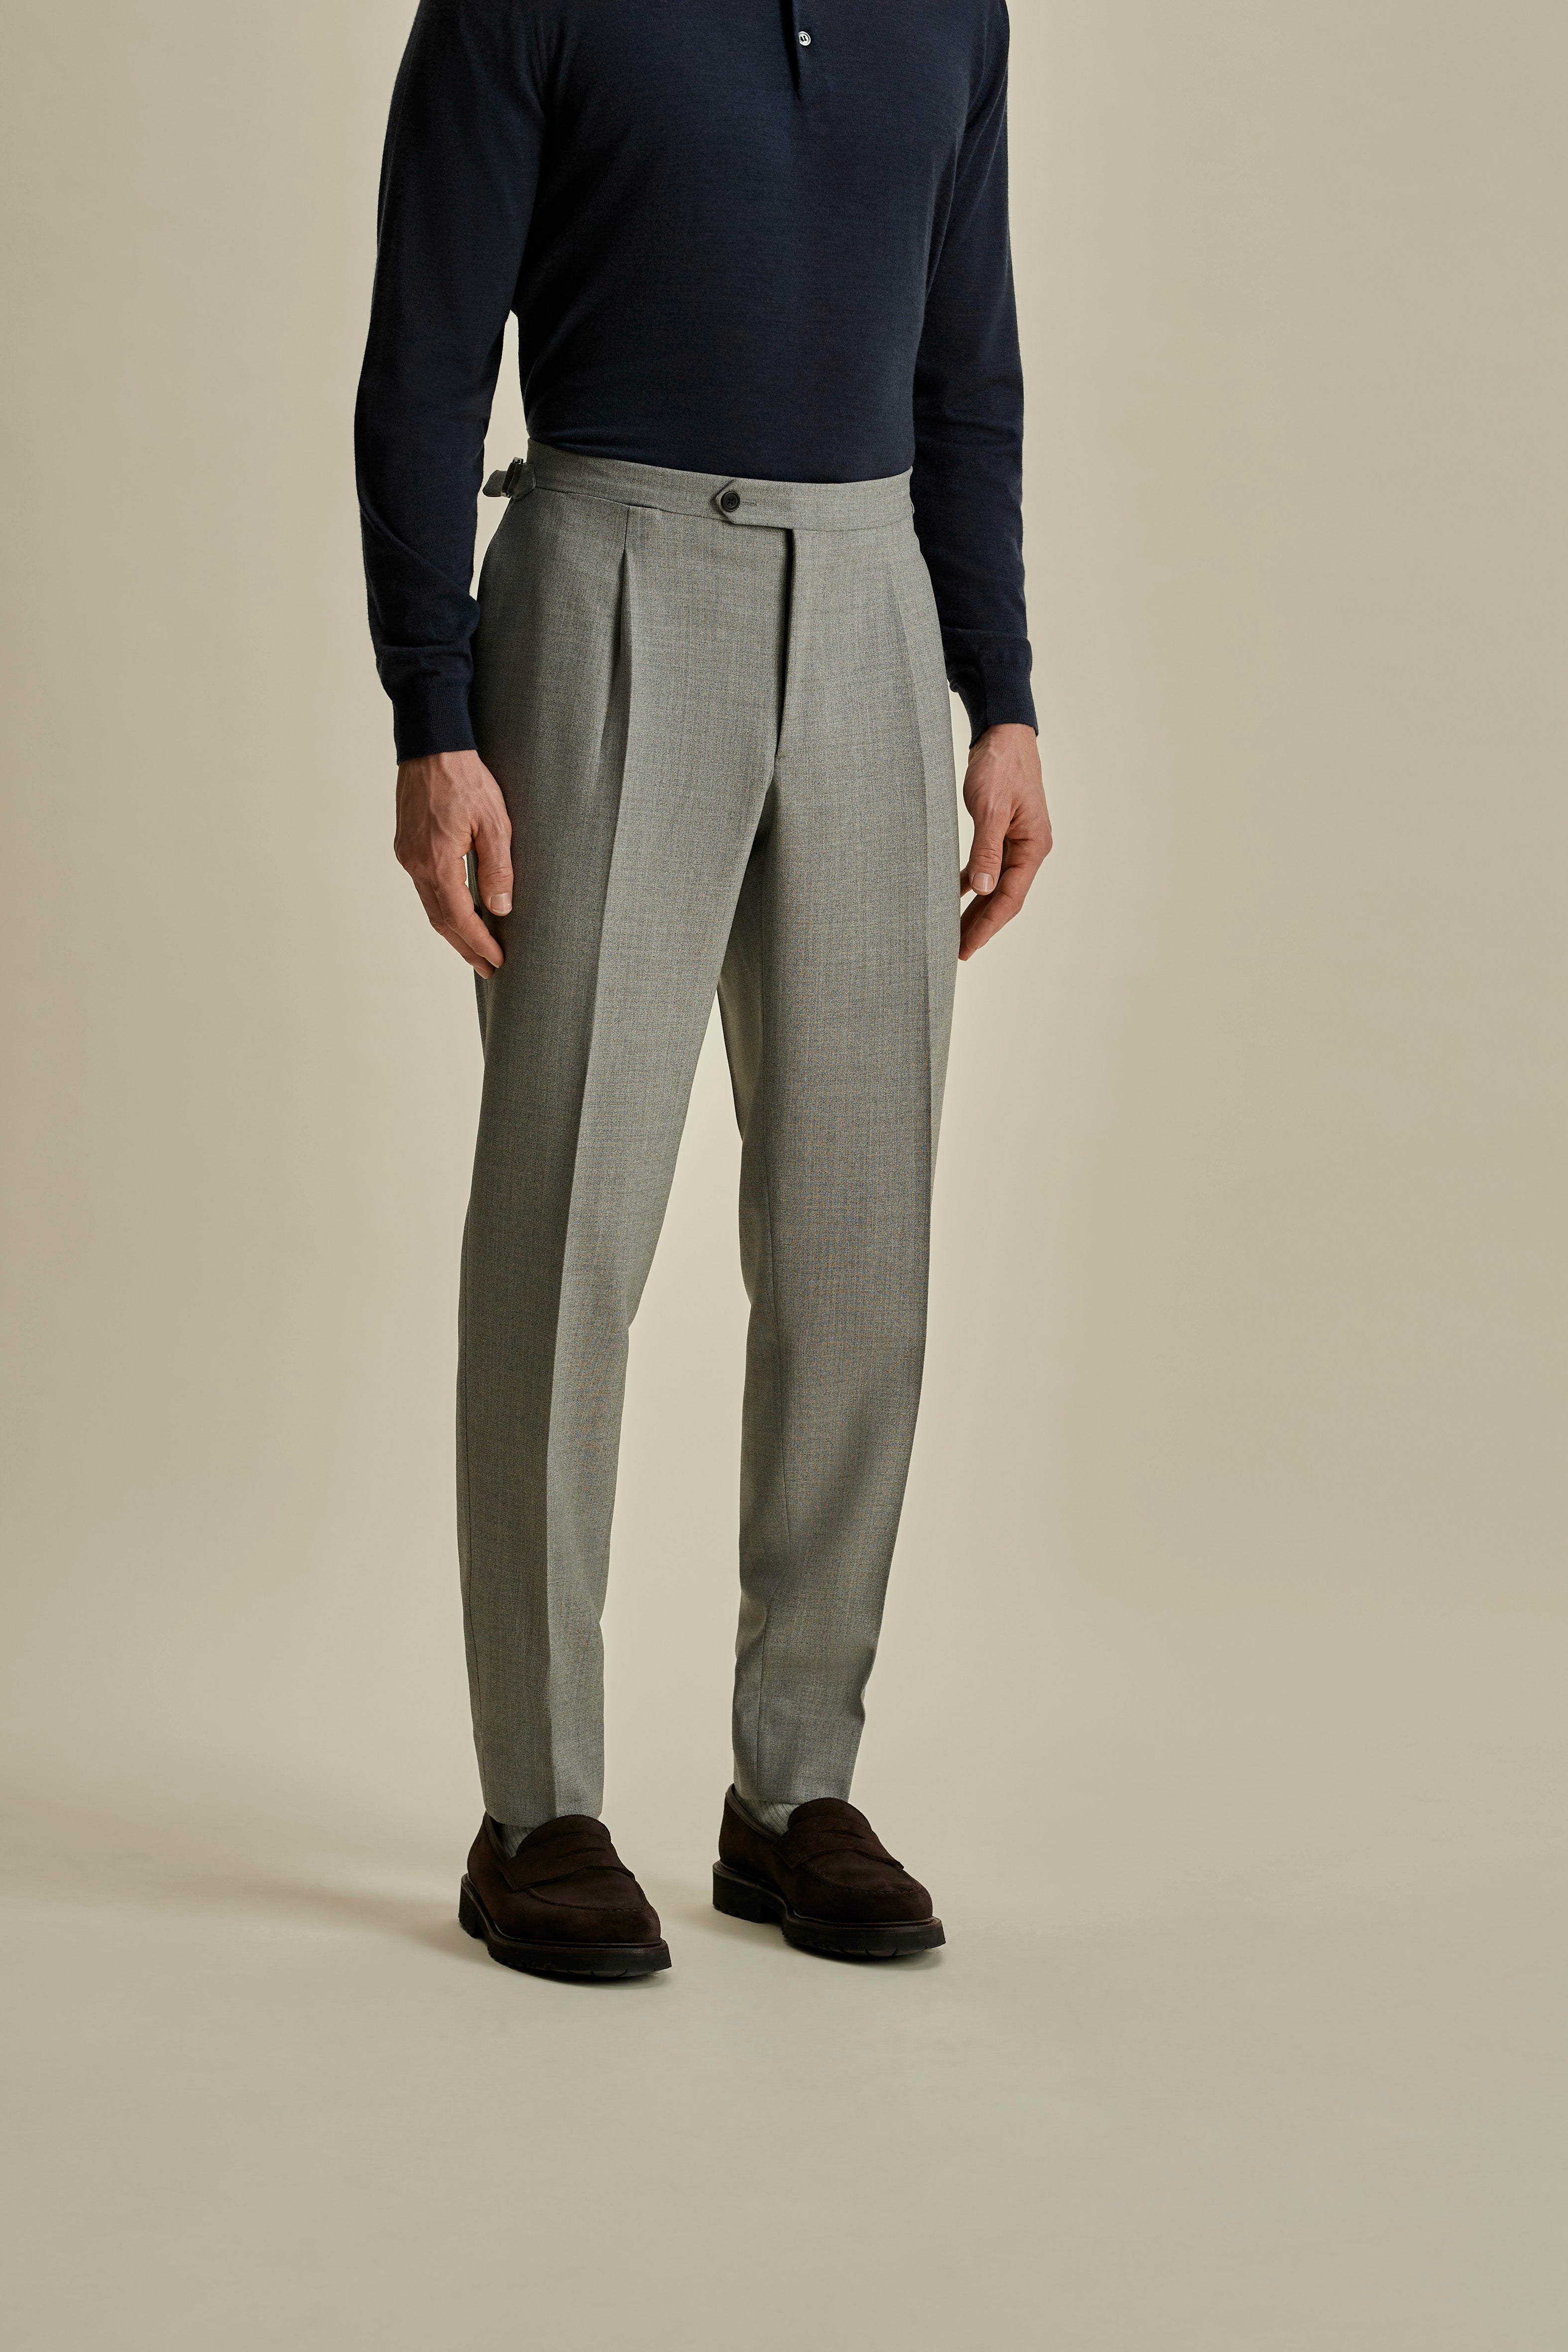 Wool Single Pleat Tailored Trousers Cool Grey Cropped Model Image